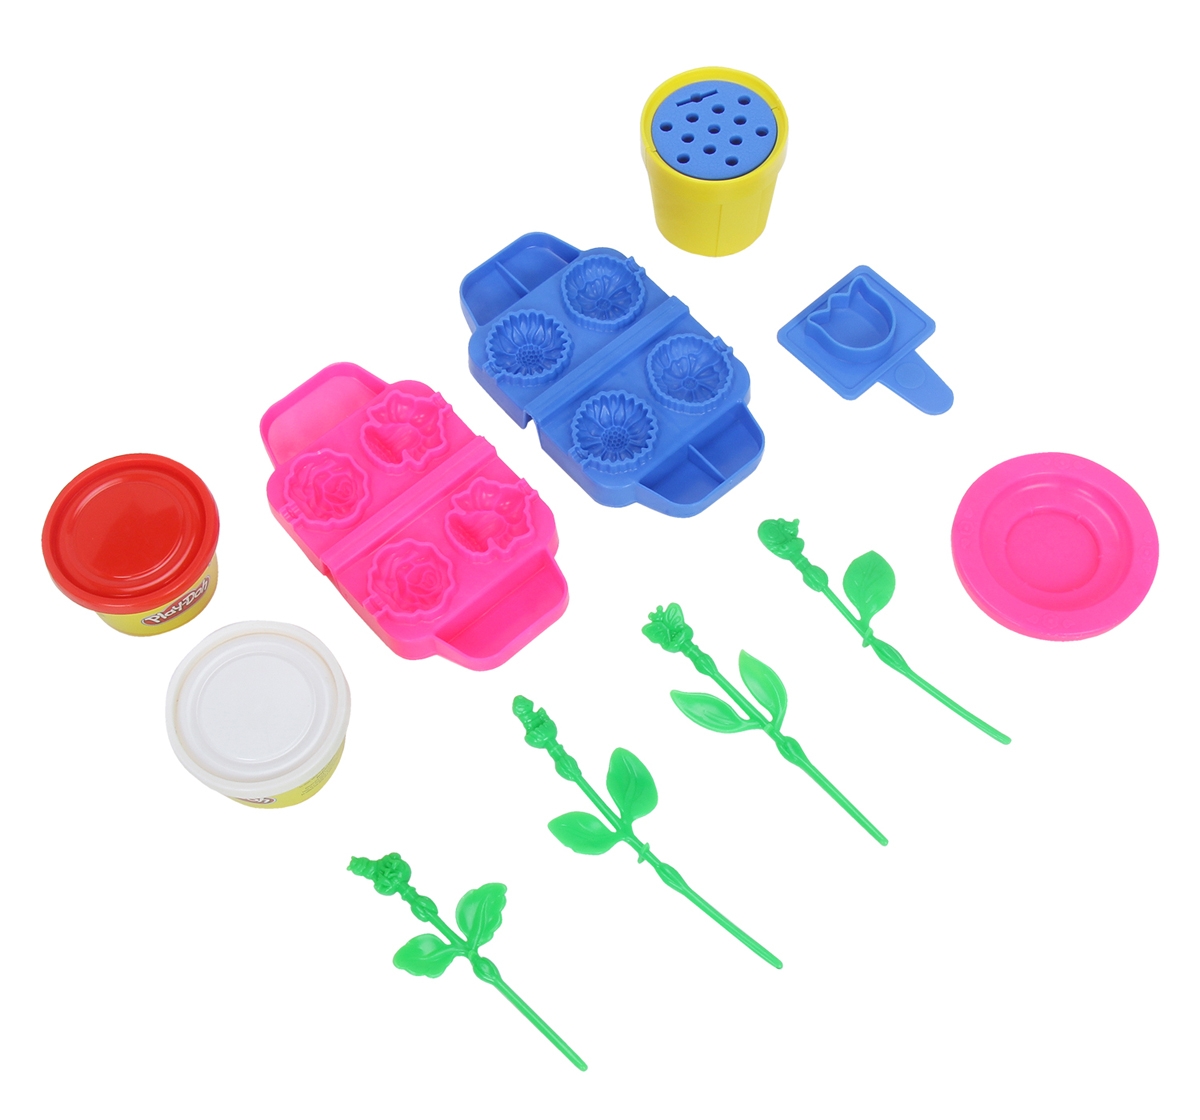 Play-Doh | Play Doh Rose Garden Playset for Kids 3Y+, Multicolour 1